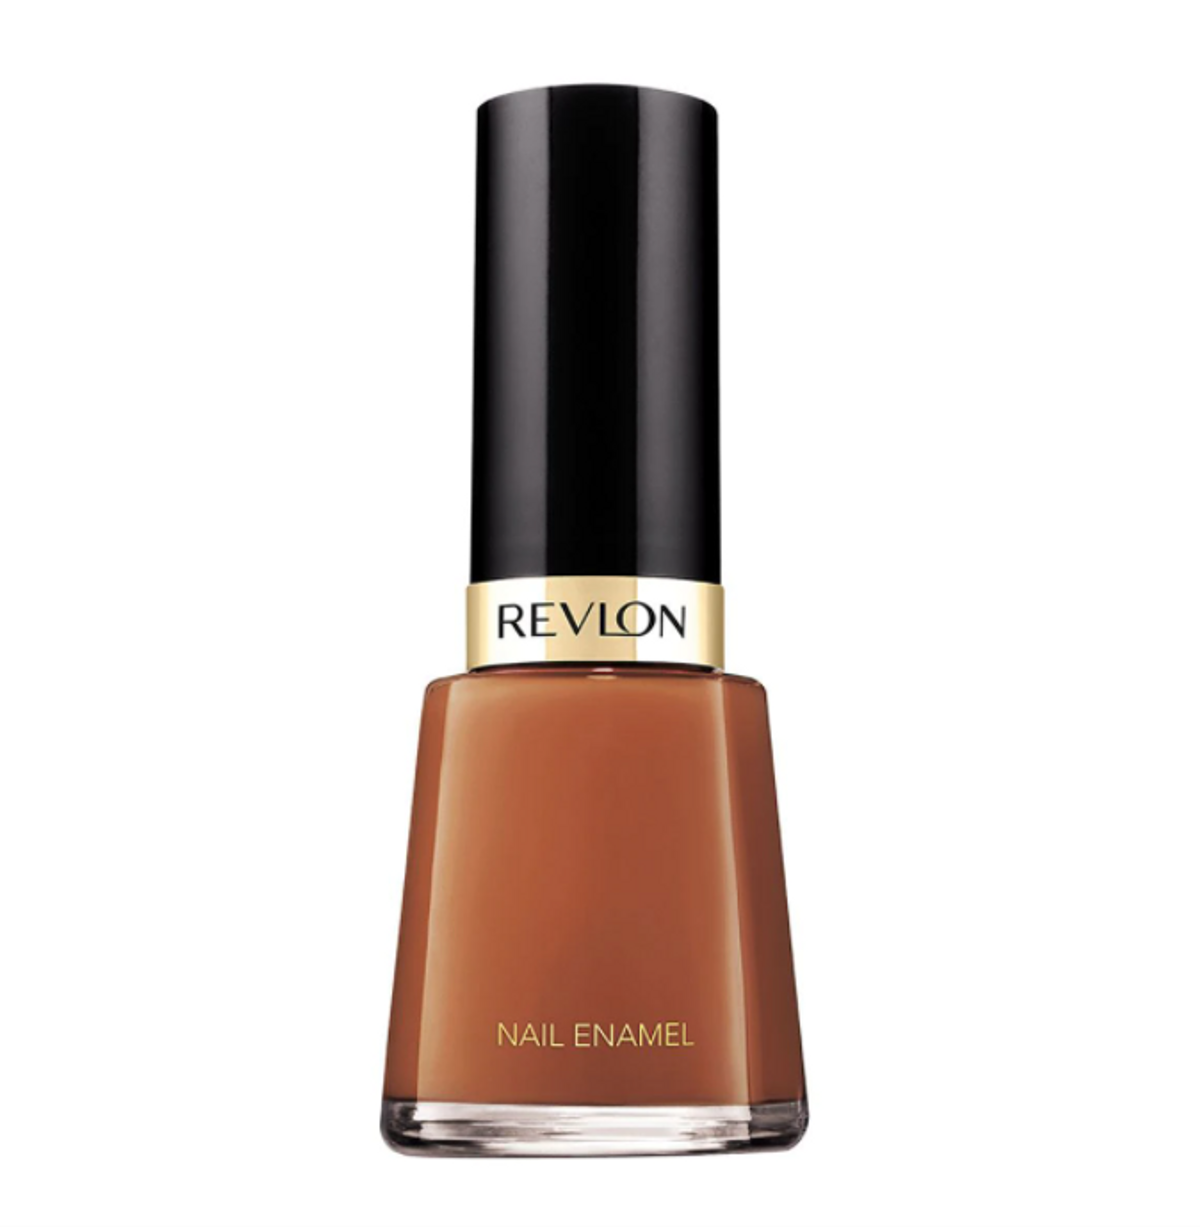 Nail Enamel in Totally Toffee